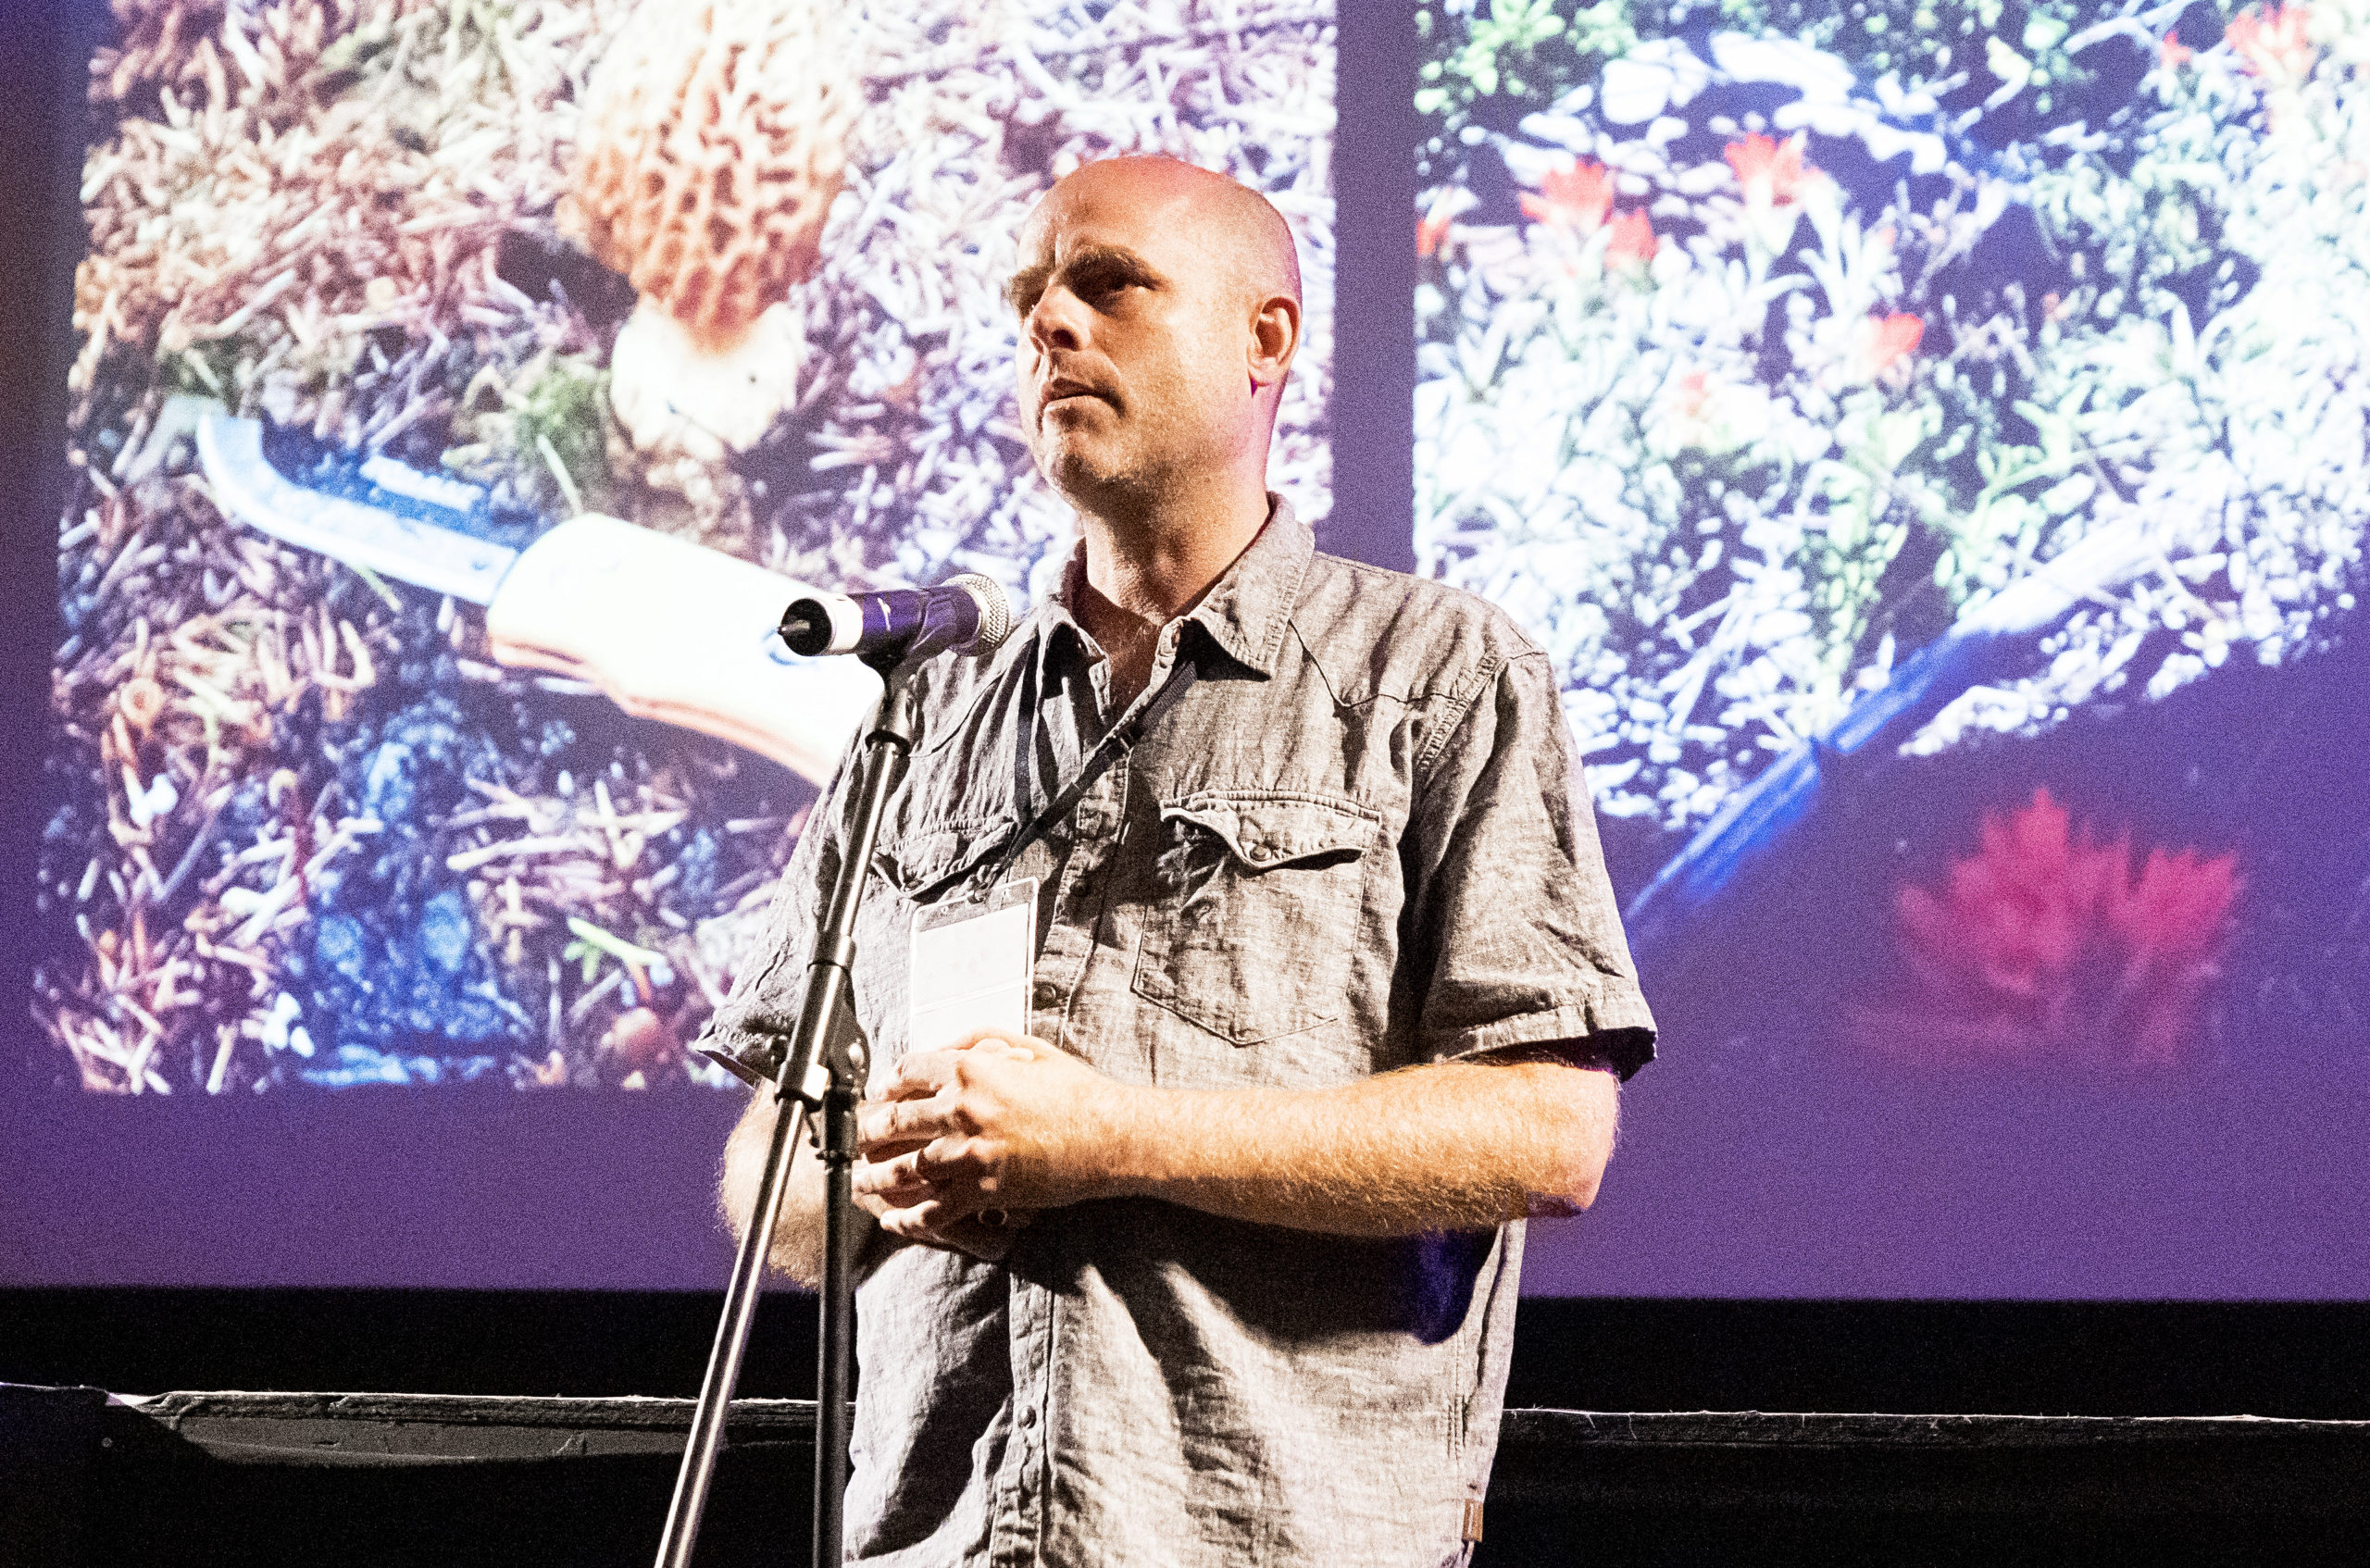 man with button down shirt and bald head standing in front a large movie screen talking in a microphone